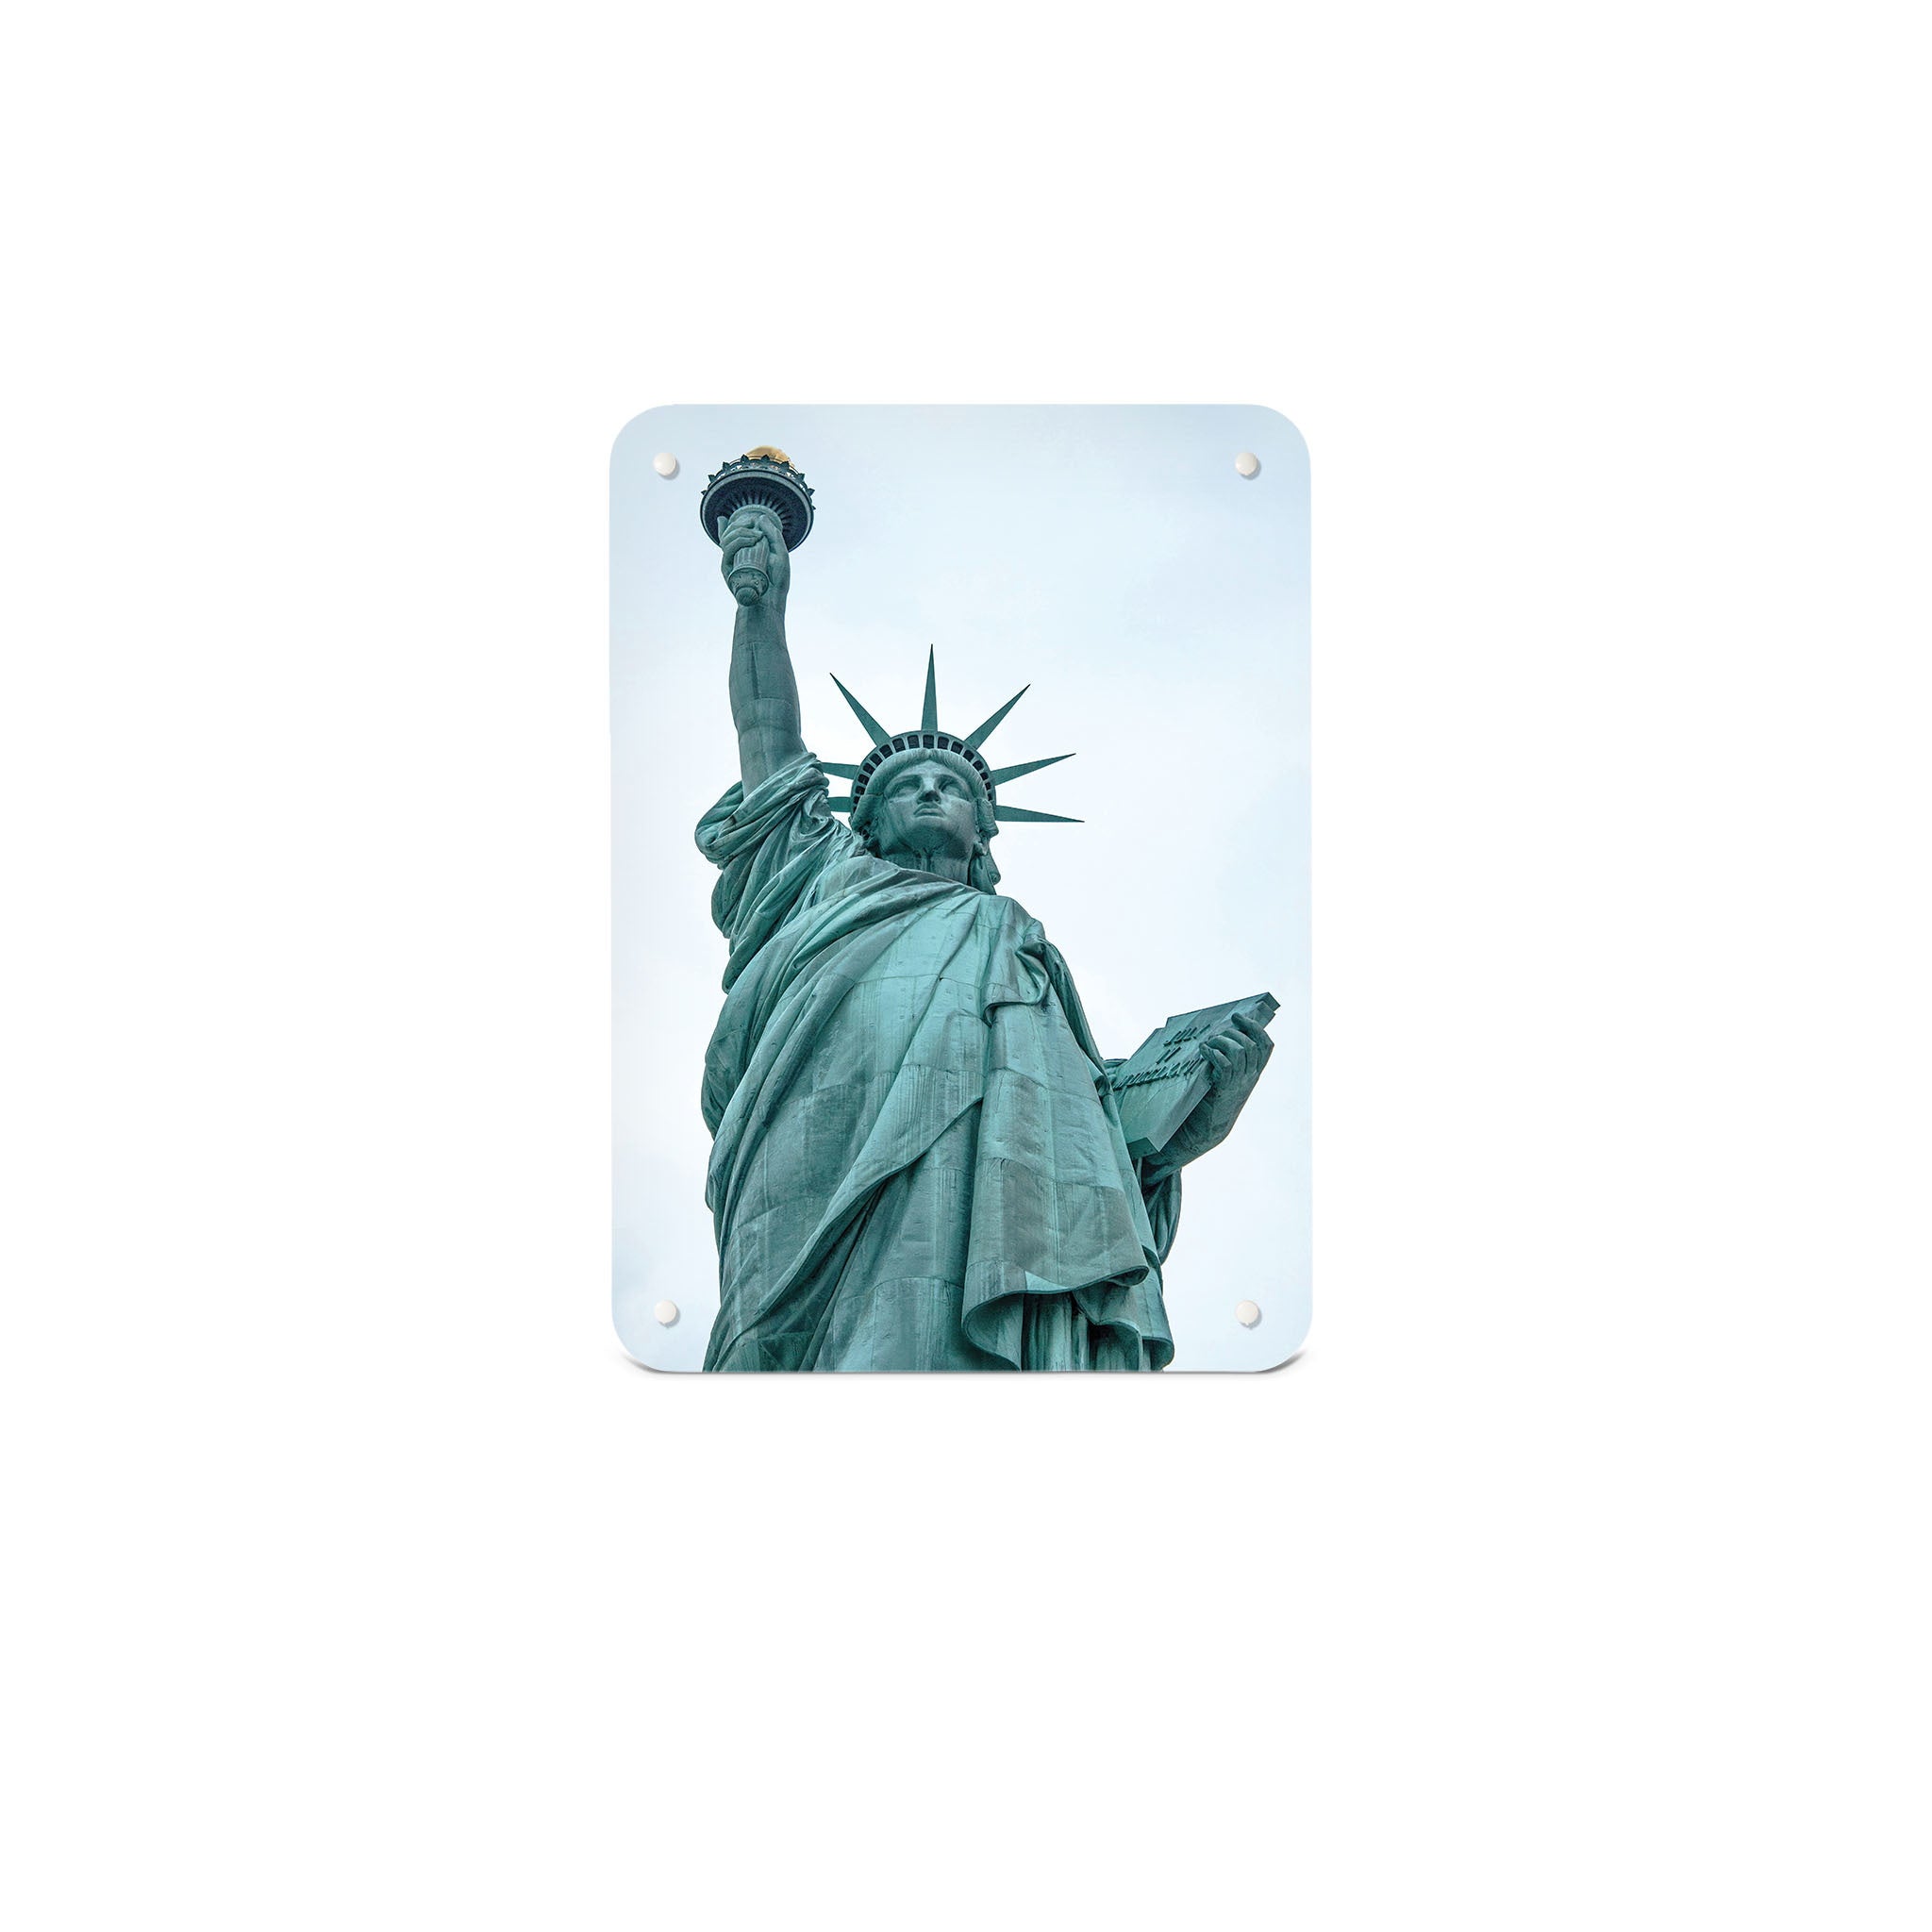 A small magnetic notice board by Beyond the Fridge with a photographic image of the Statue of Liberty